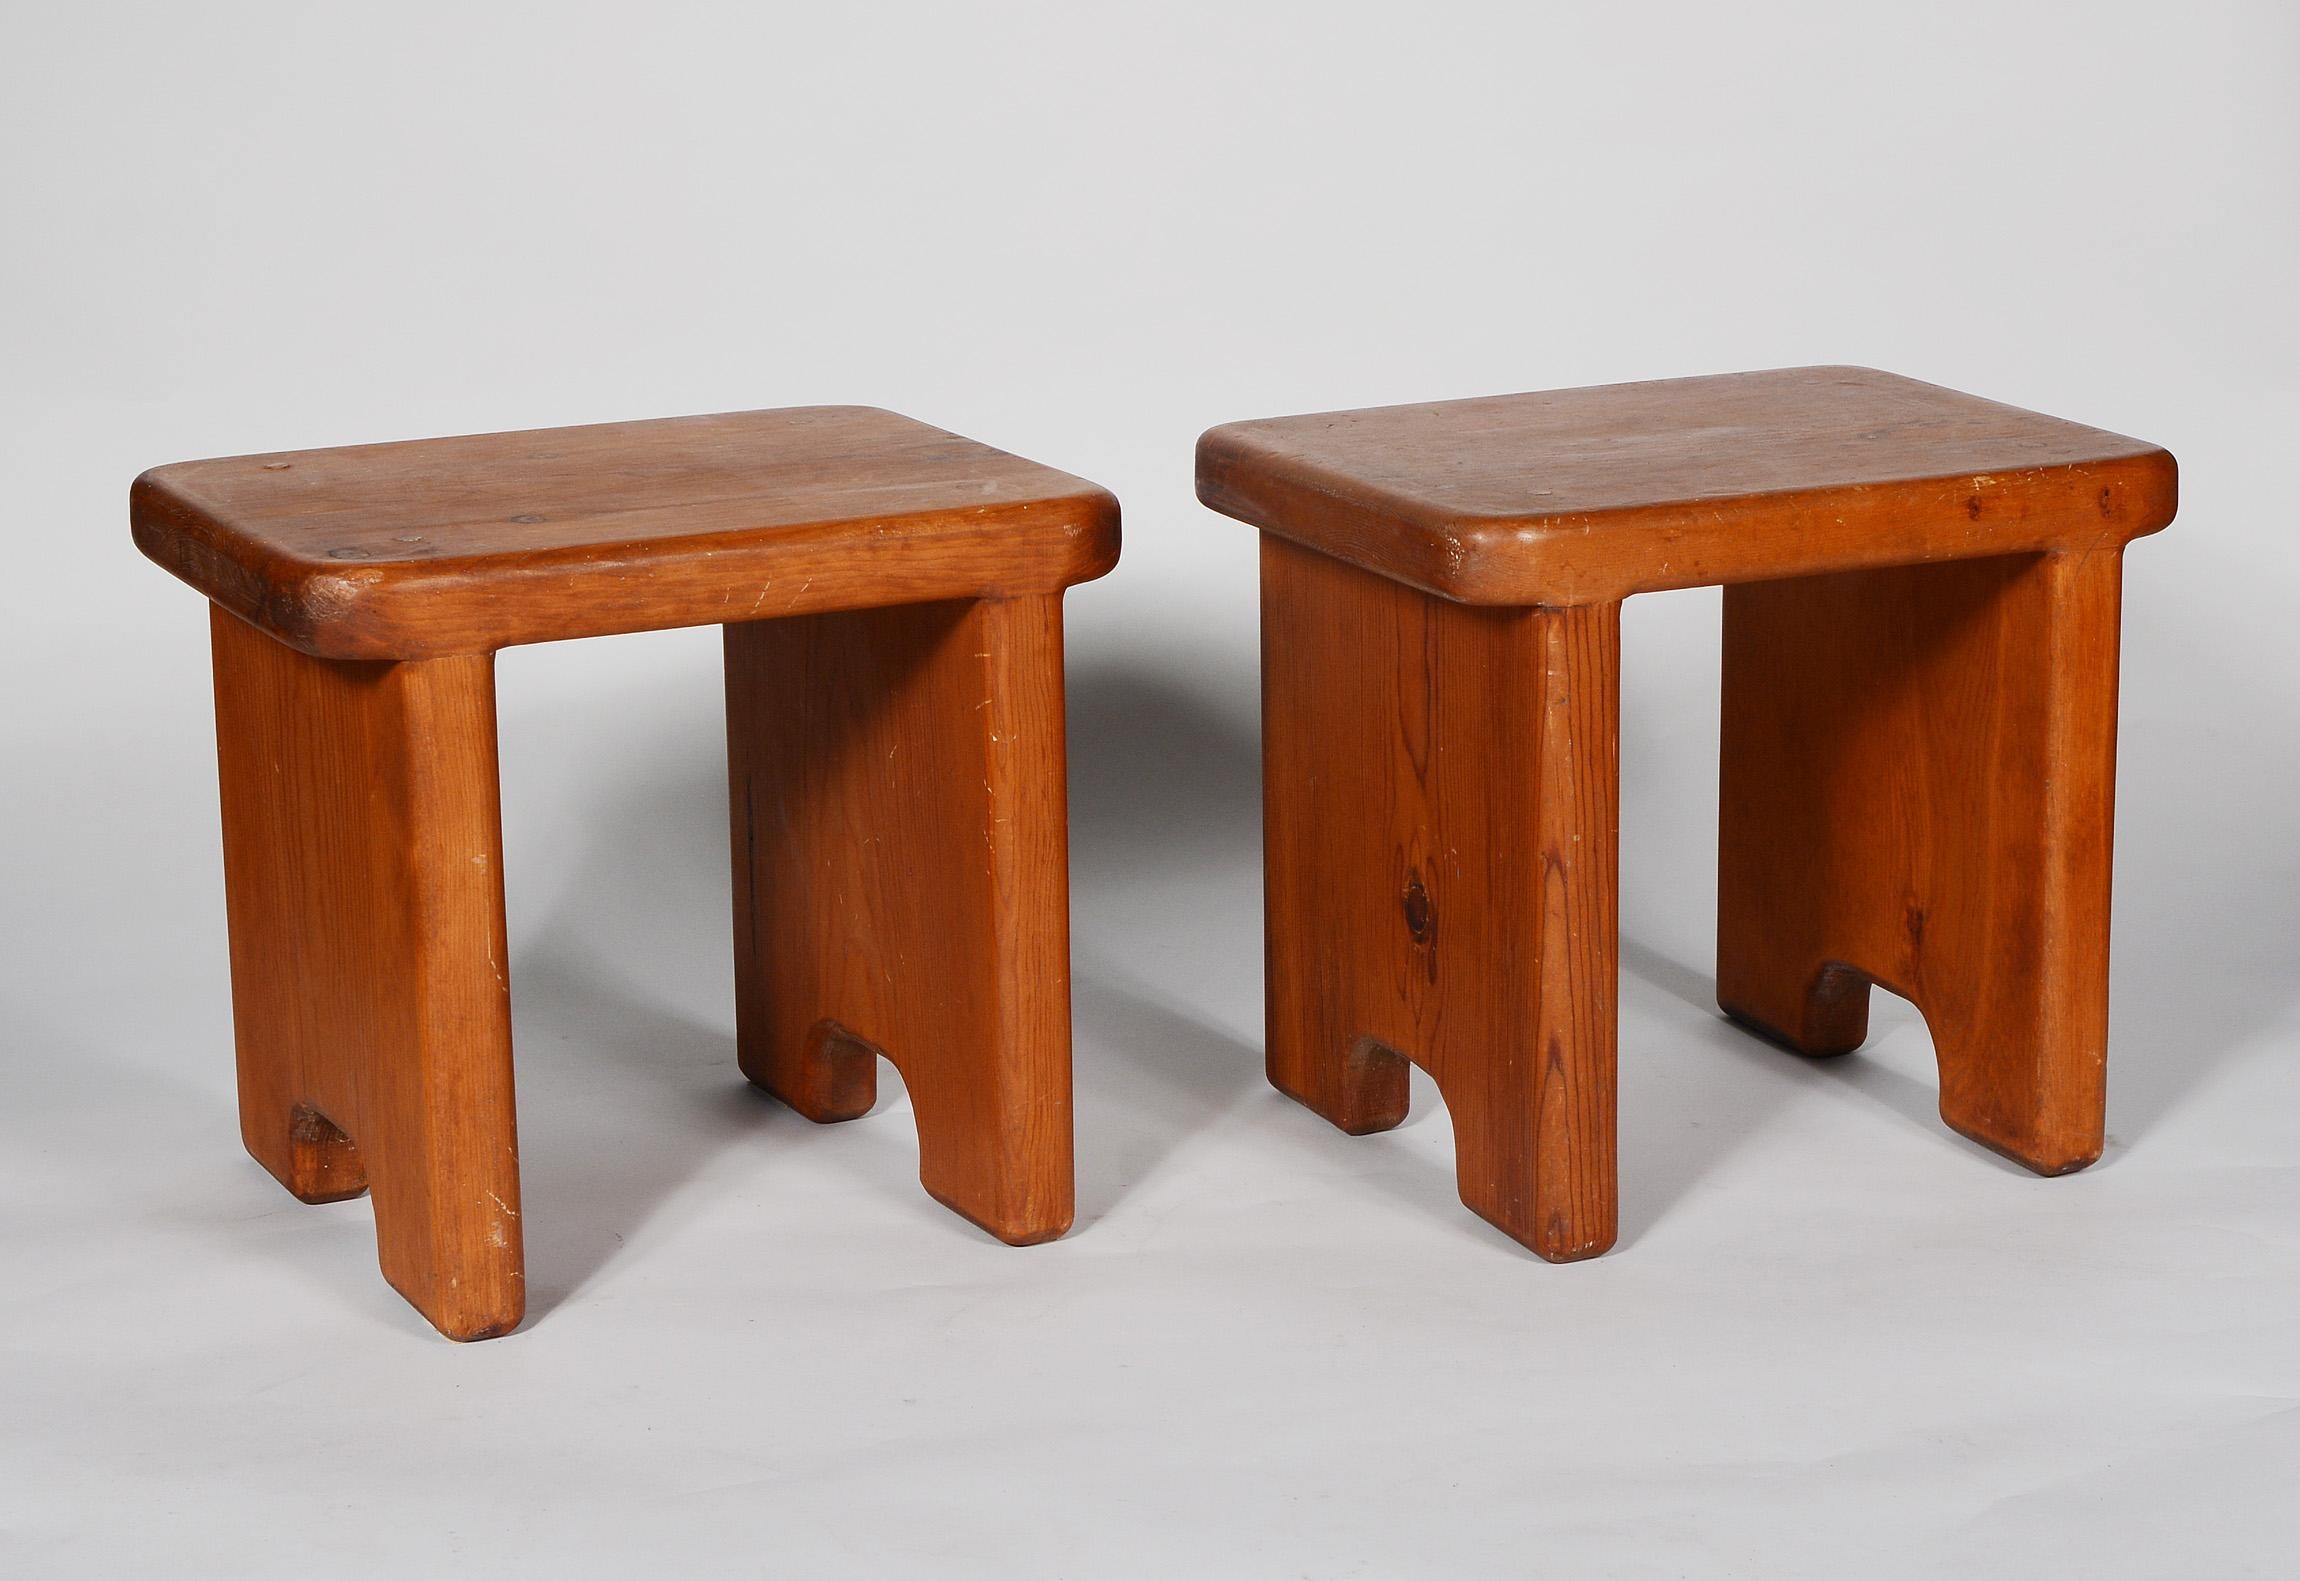 Pair of craft studio stools or small tables. These stools have the classic California modern design with Asian influence. These appear to be executed in redwood. The stools have been cleaned and waxed and exhibit a great patina from years of use.